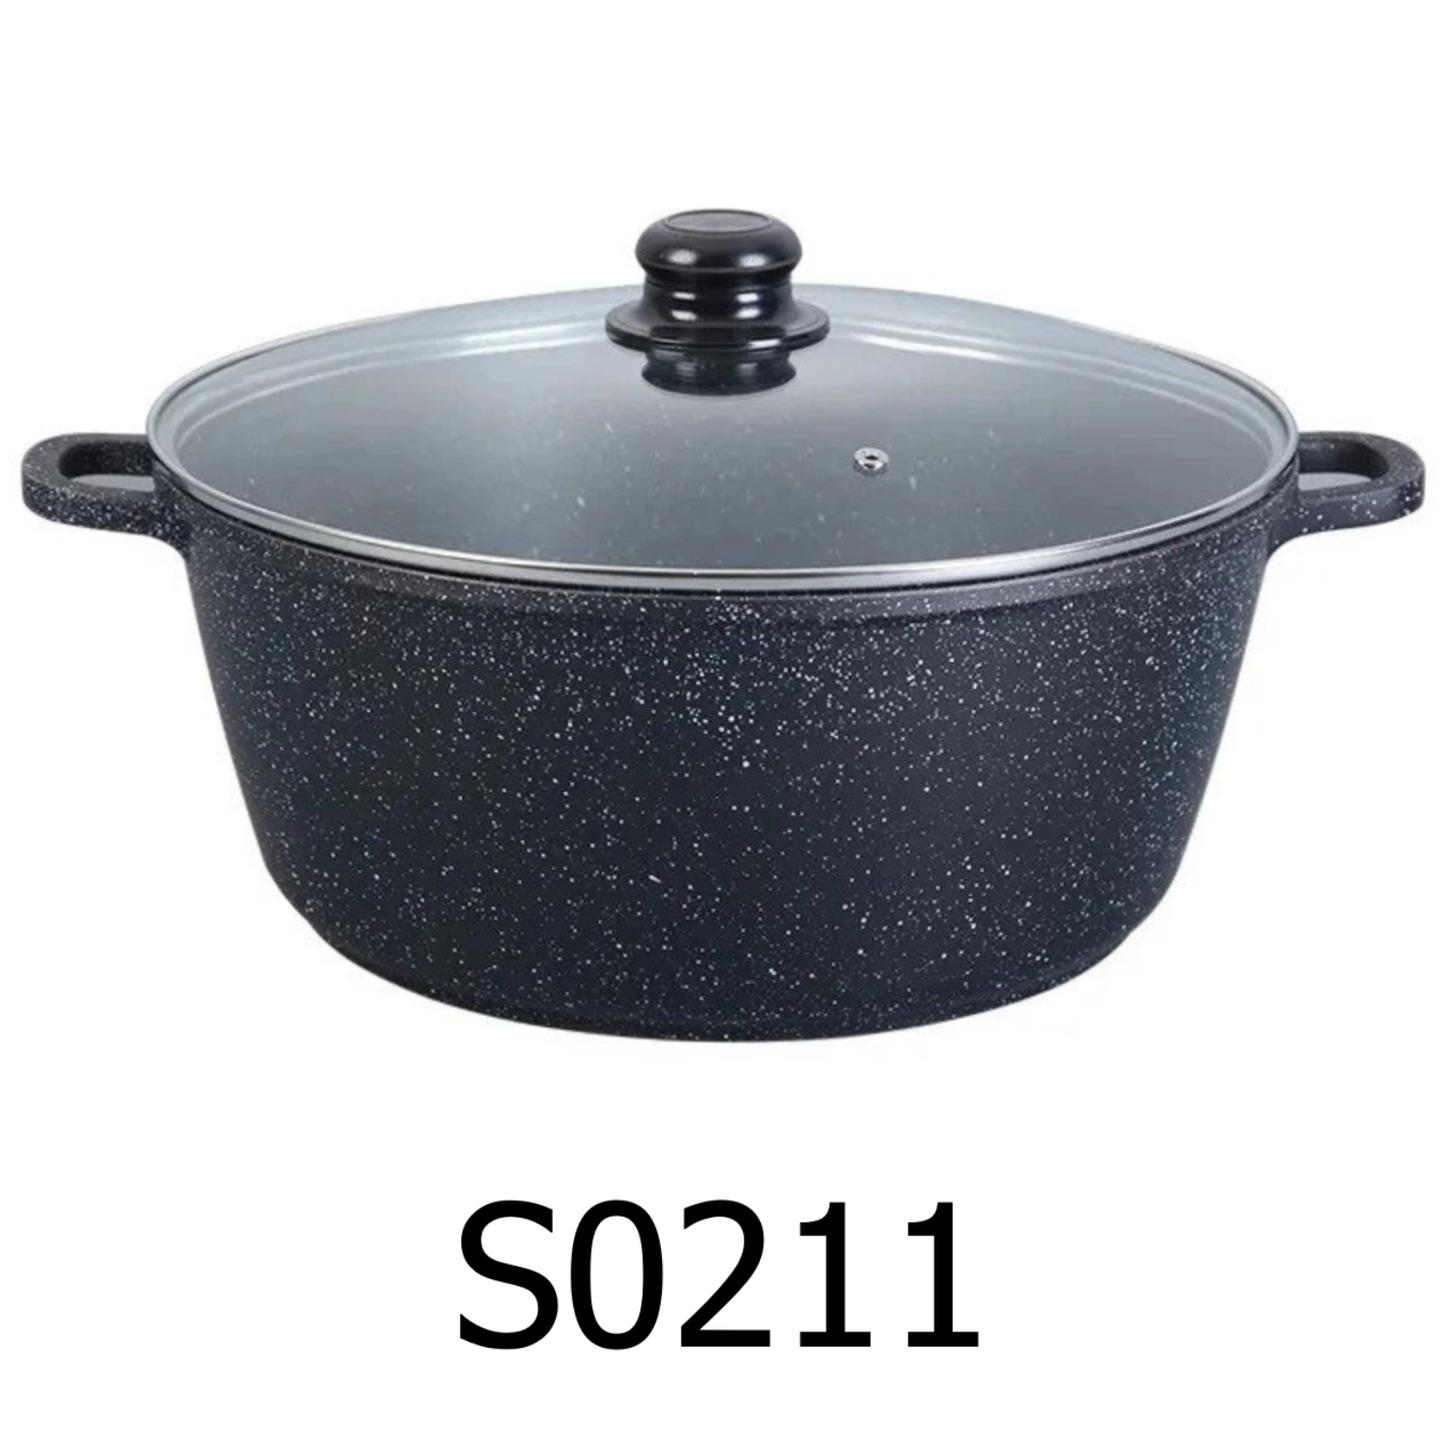 44cm Marble Dutch Oven Non-Stick High Quality